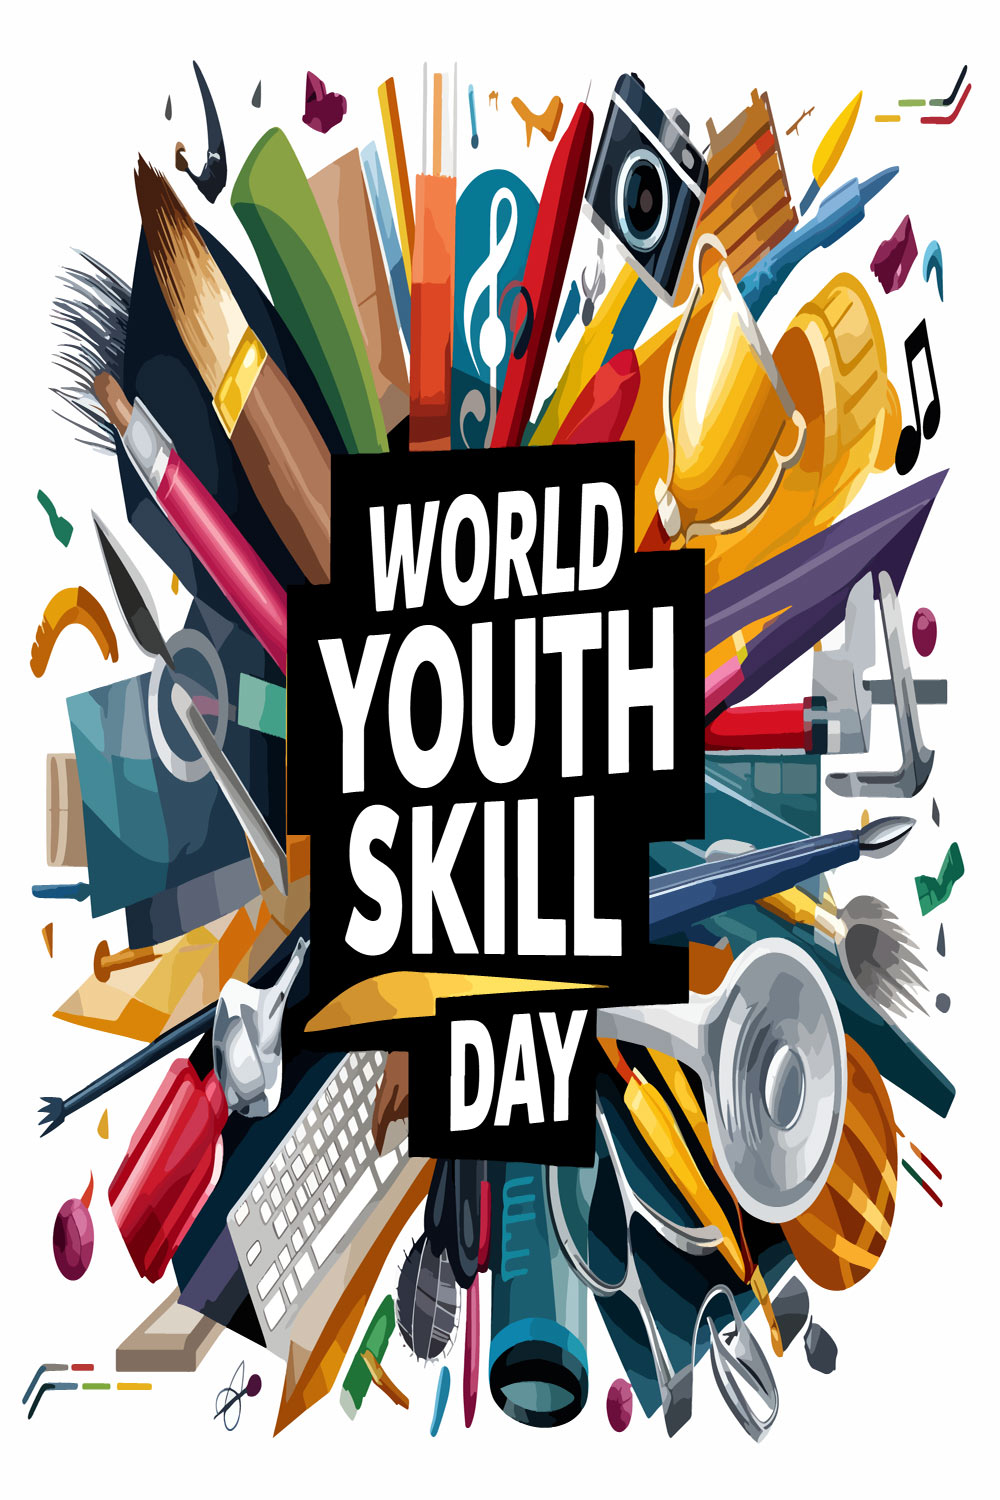 World Youth skill day pinterest preview image.